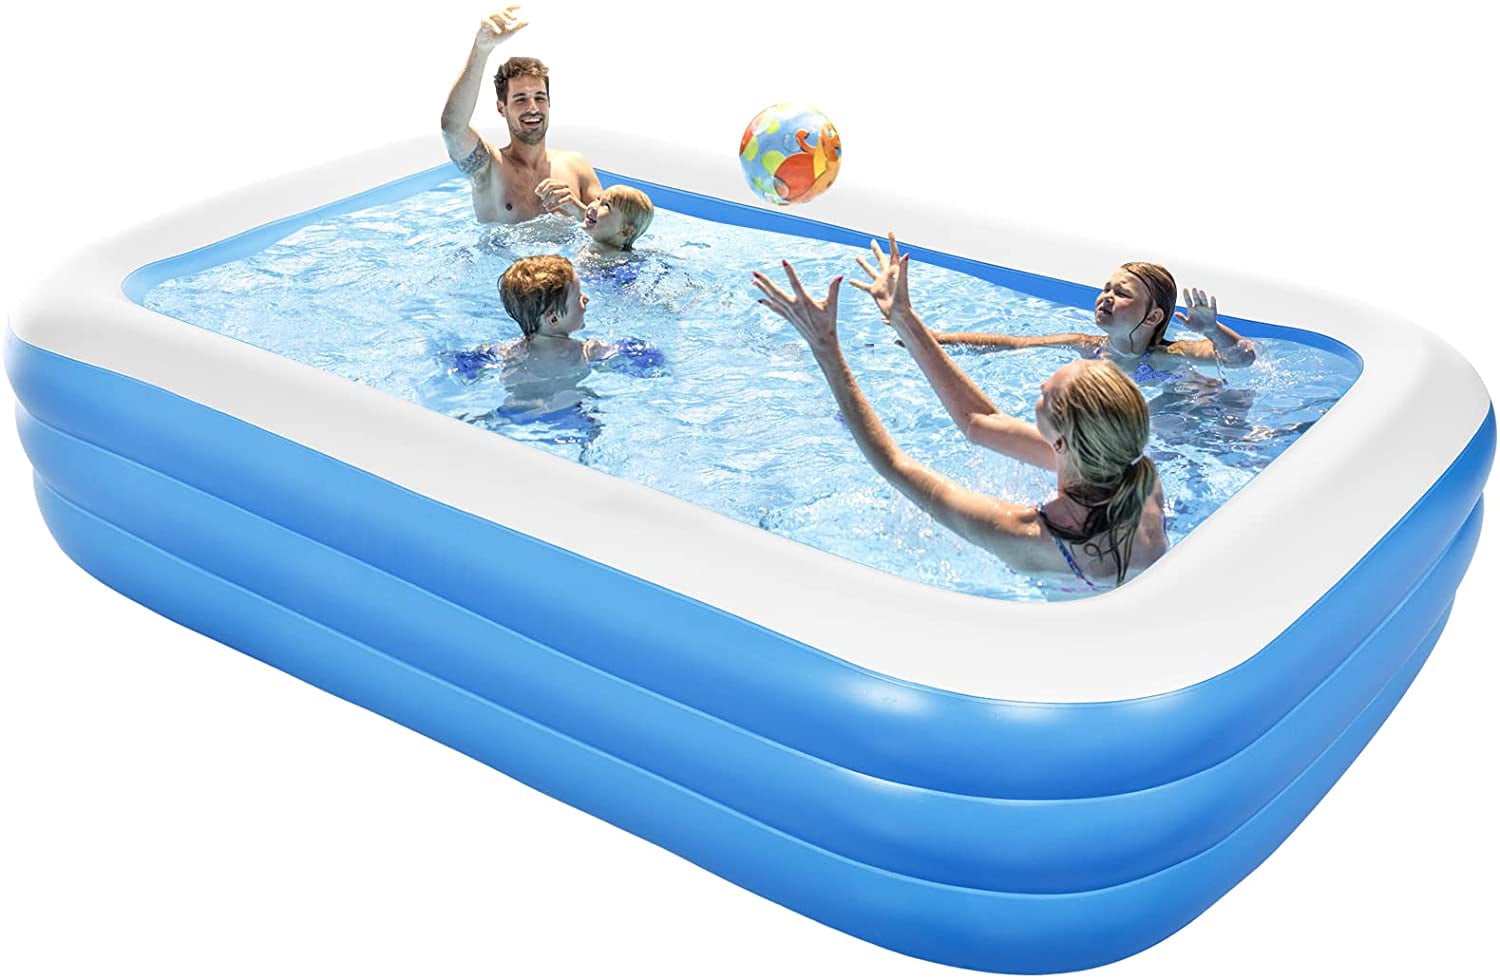 JONYJ Inflatable Pool Garden Backyard 150 x 72 x 22 Family Full-Sized Inflatable Swimming Pool Adults Toddlers Oversize Lounge Kiddie Pools for Outdoor Blow Up Pool for Kids 